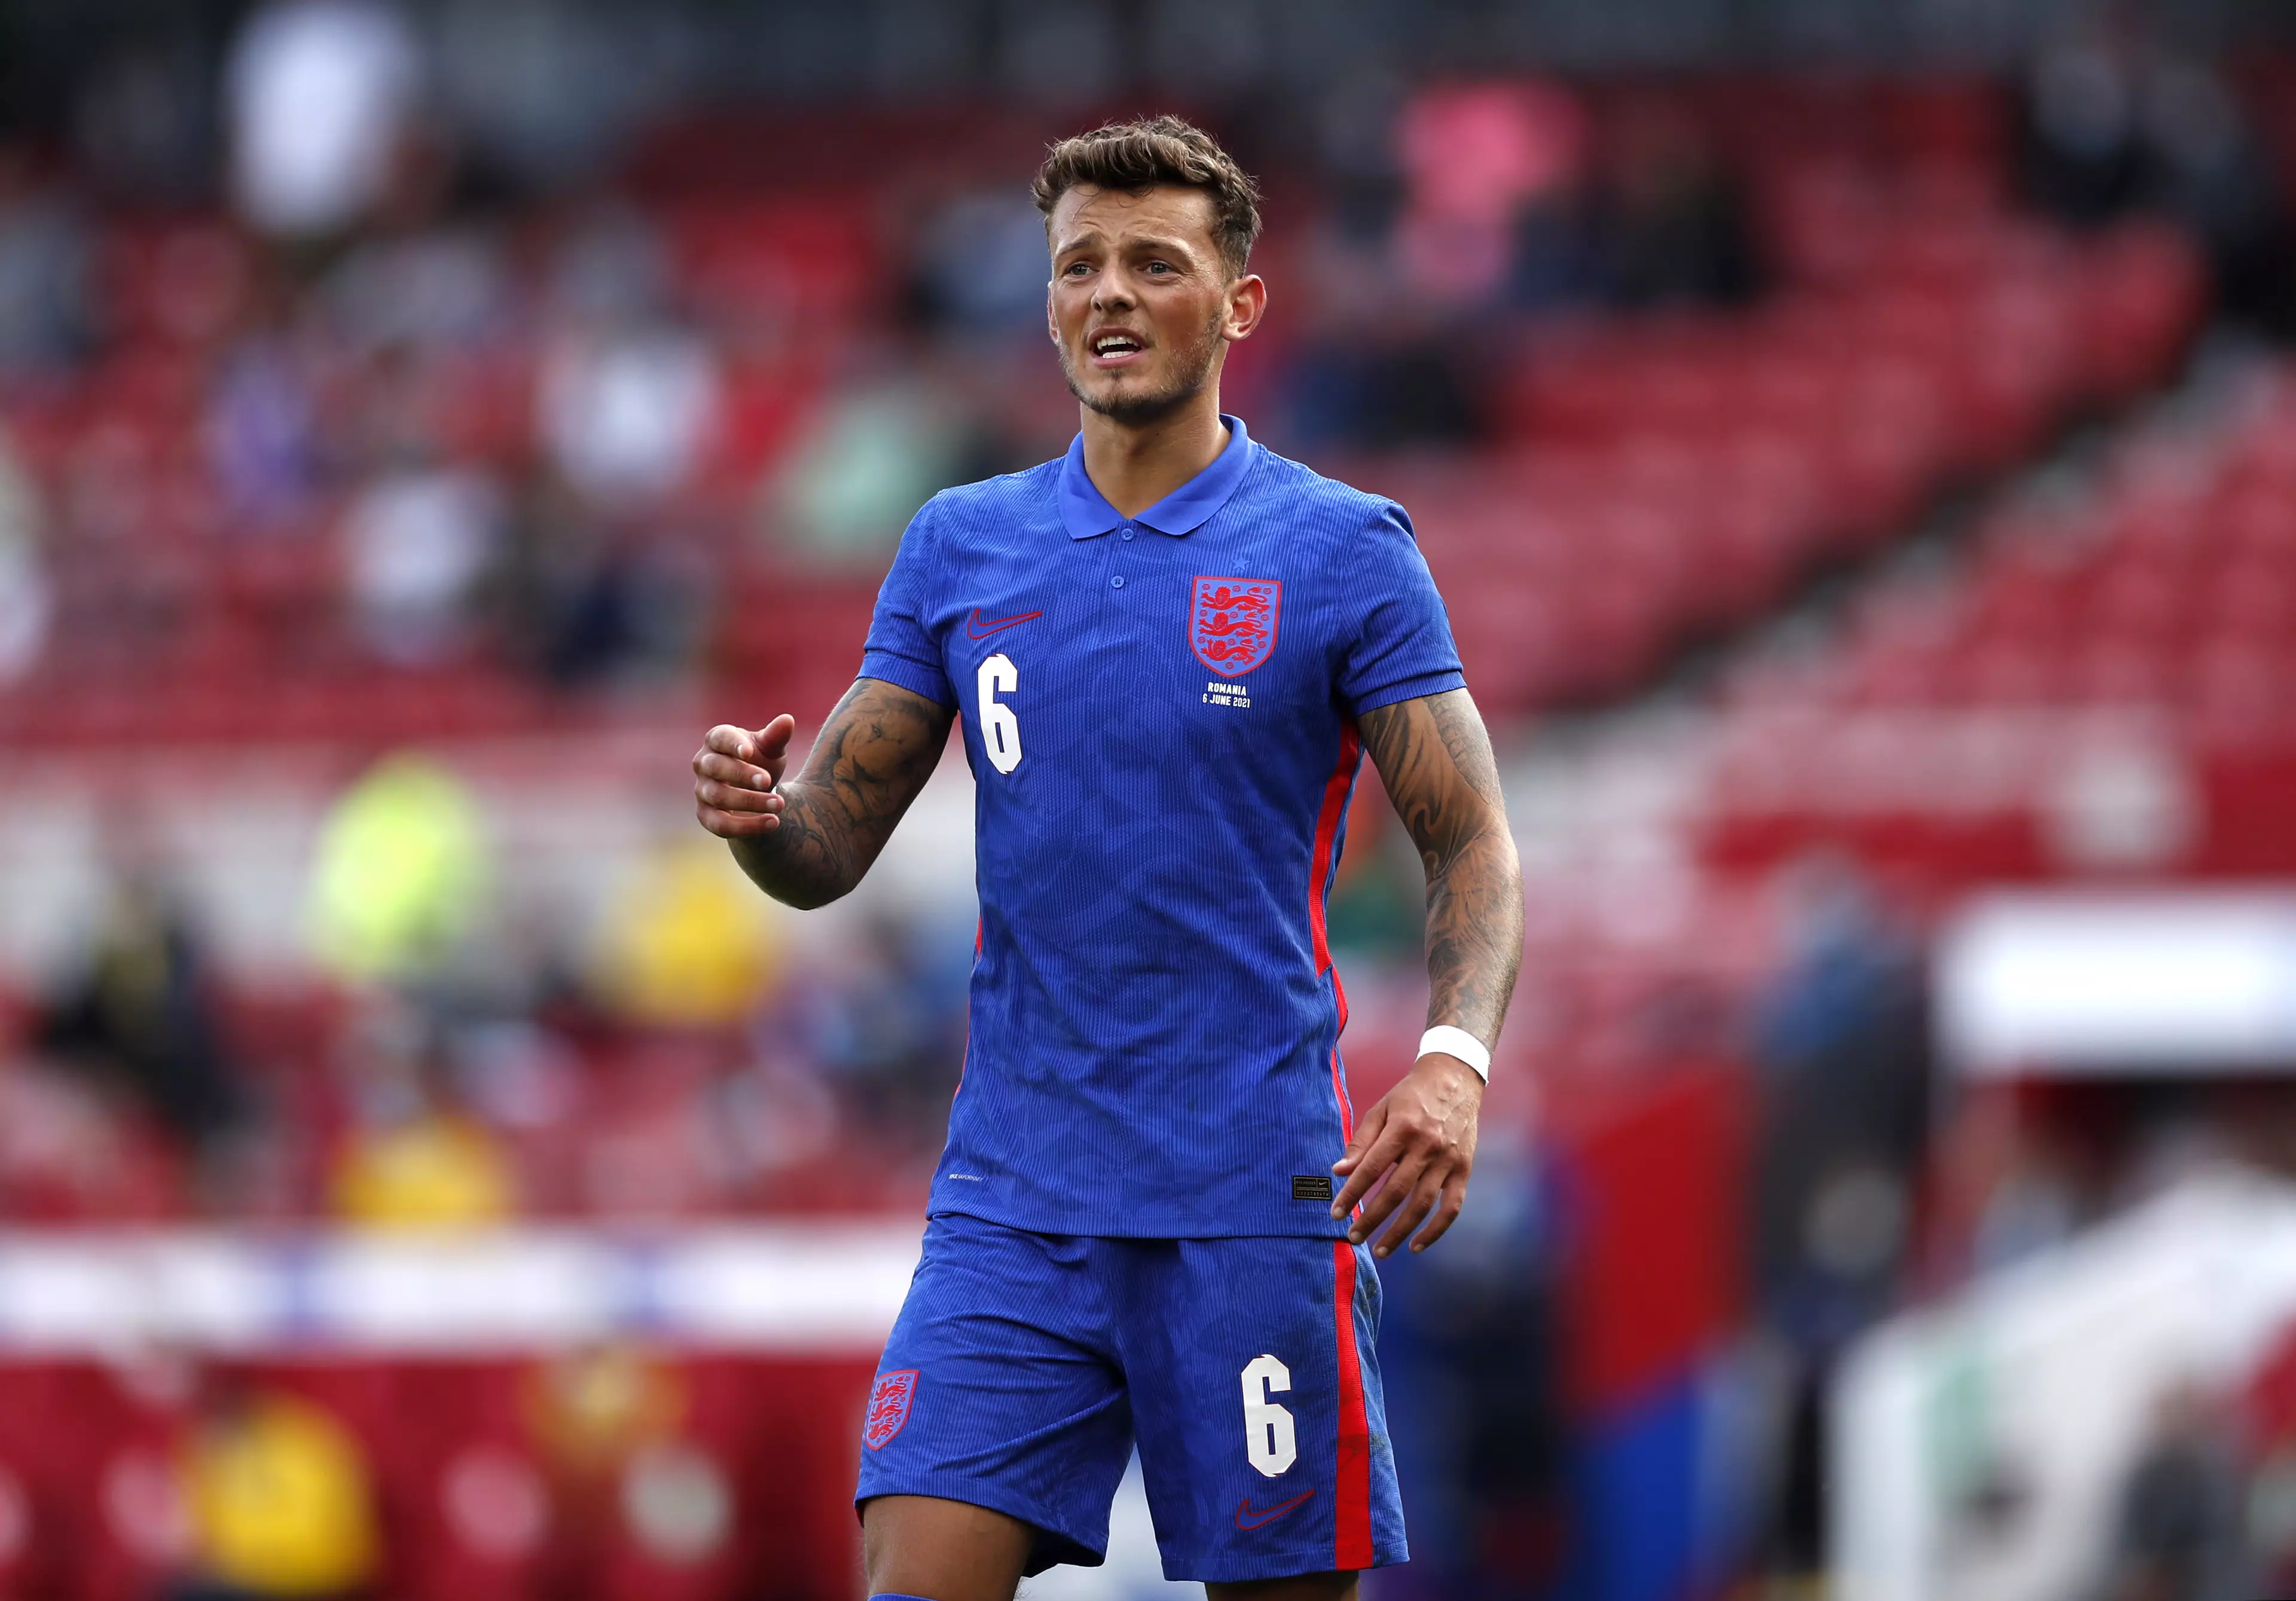 Ben White could be a surprise starter against Croatia on Sunday